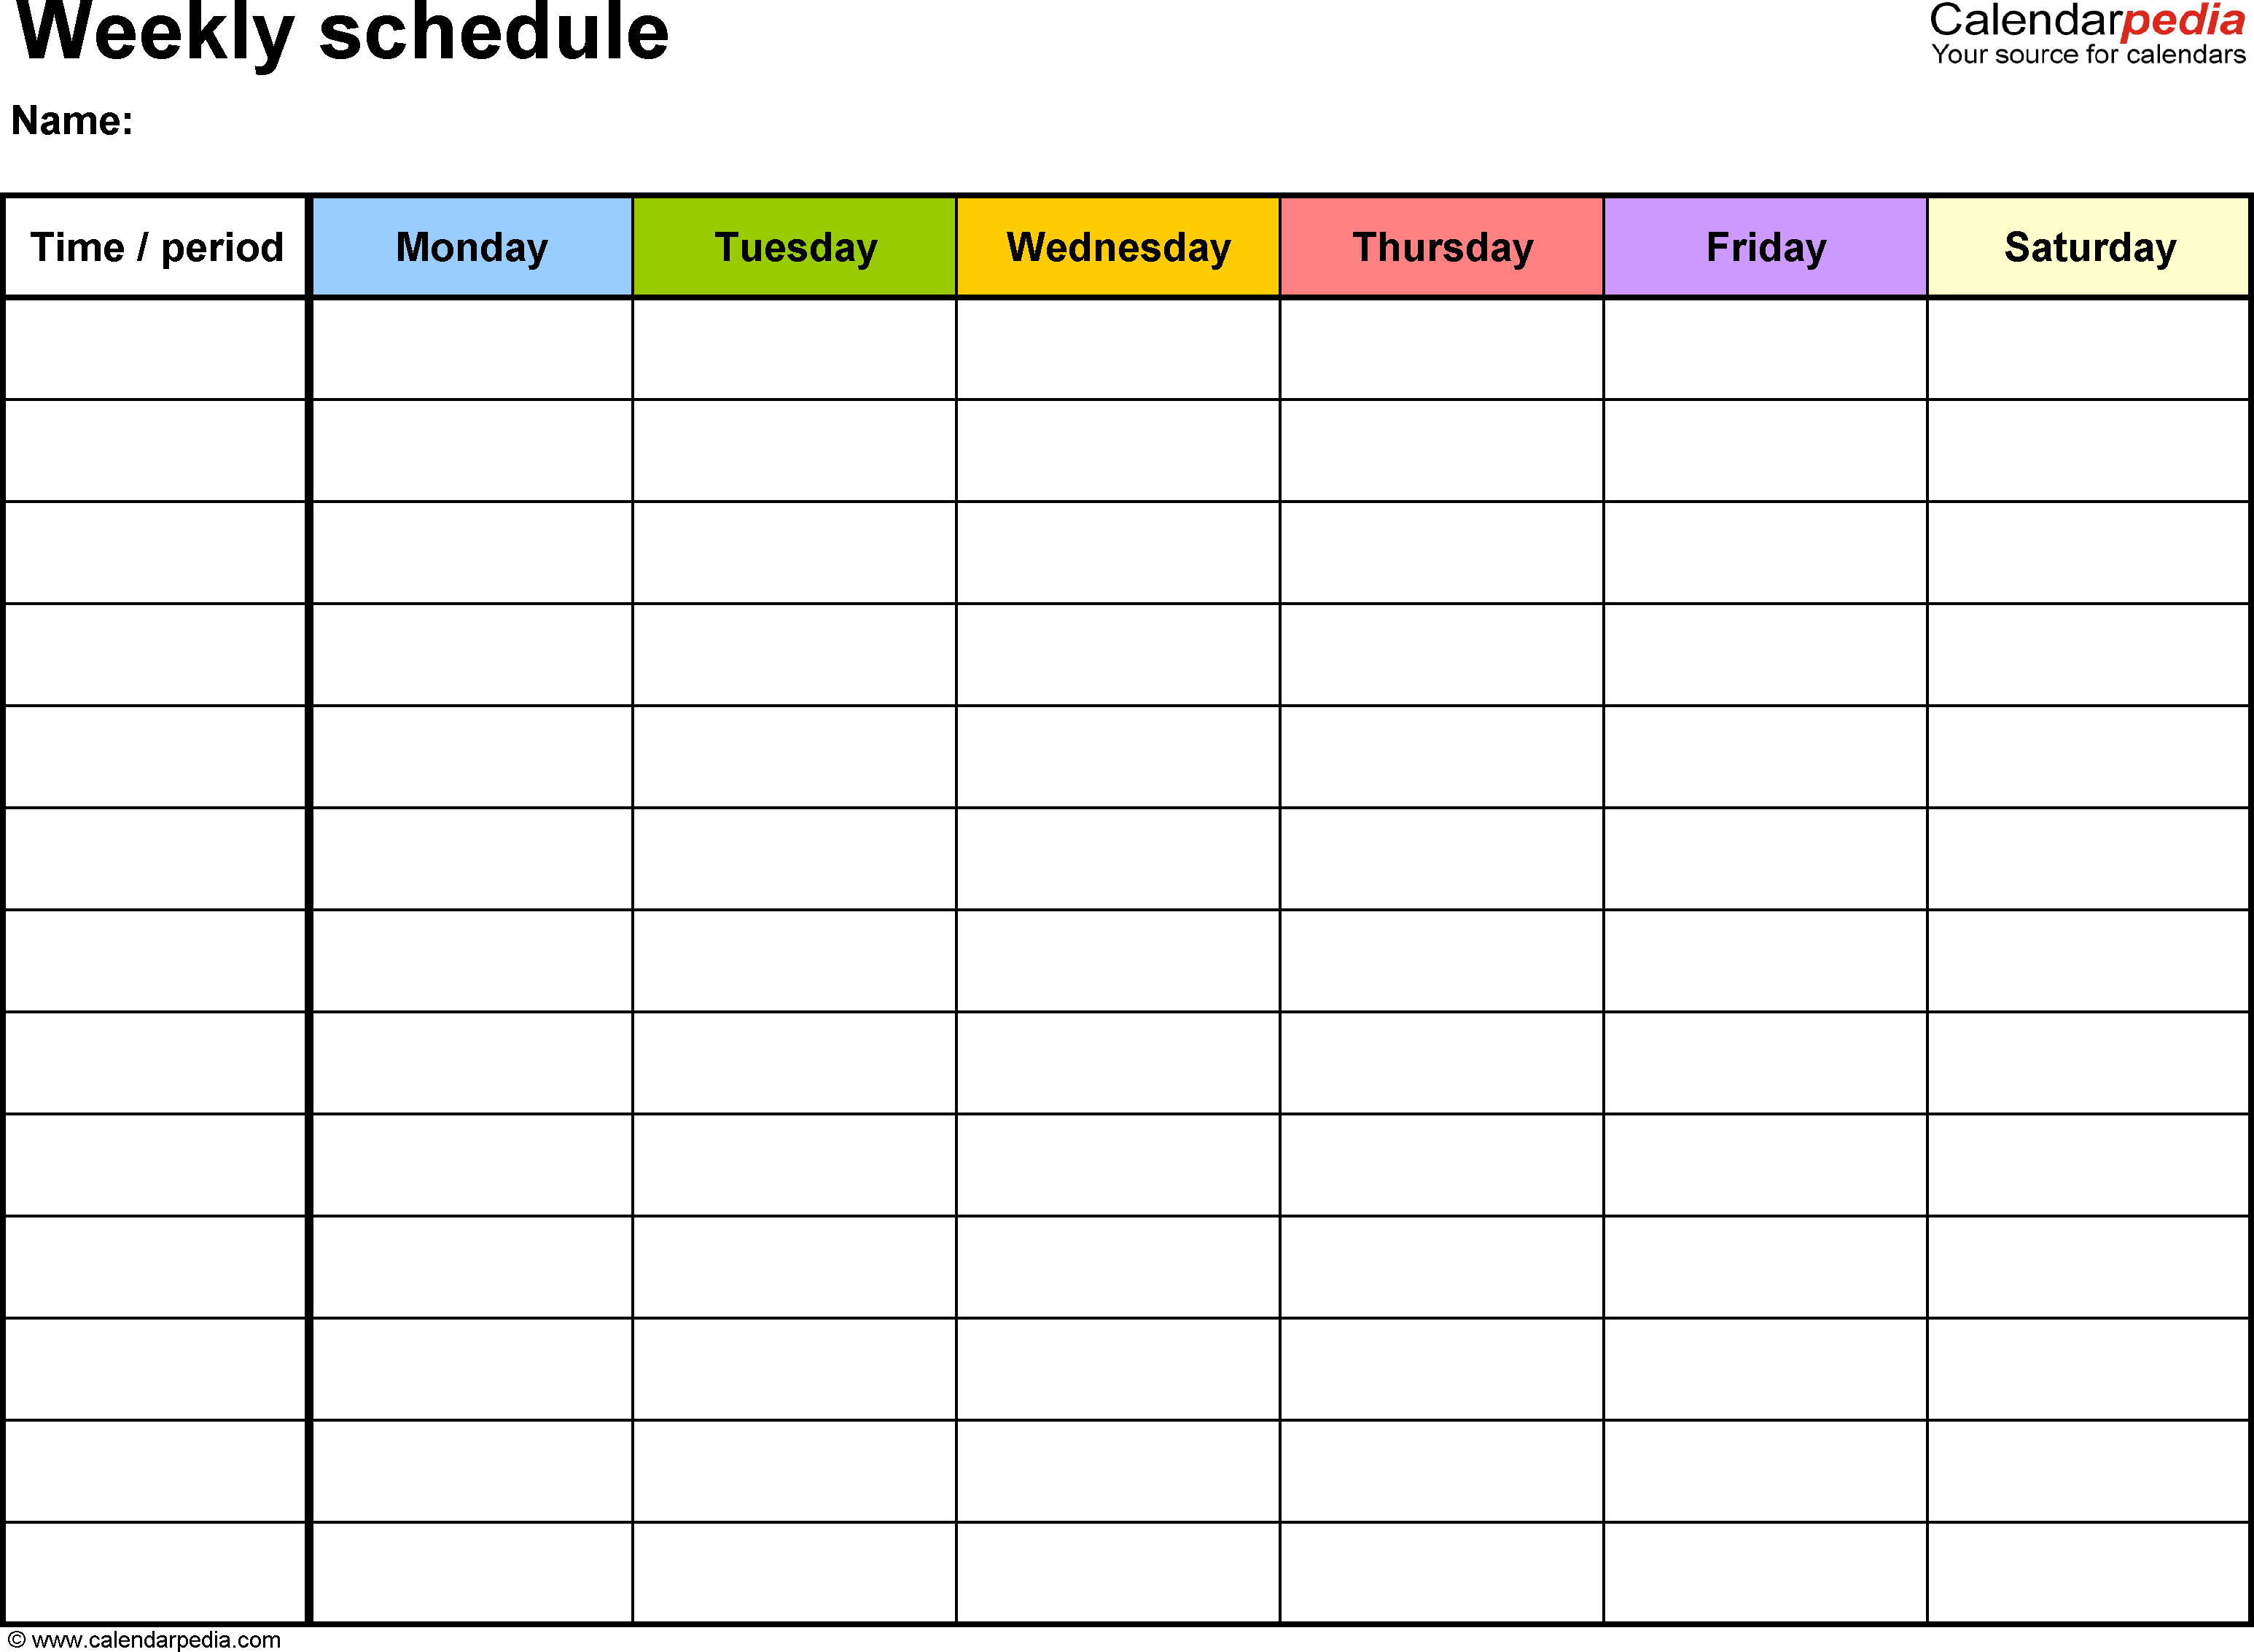 Free Weekly Schedule Templates For Word  18 Templates with Monday To Friday Planner